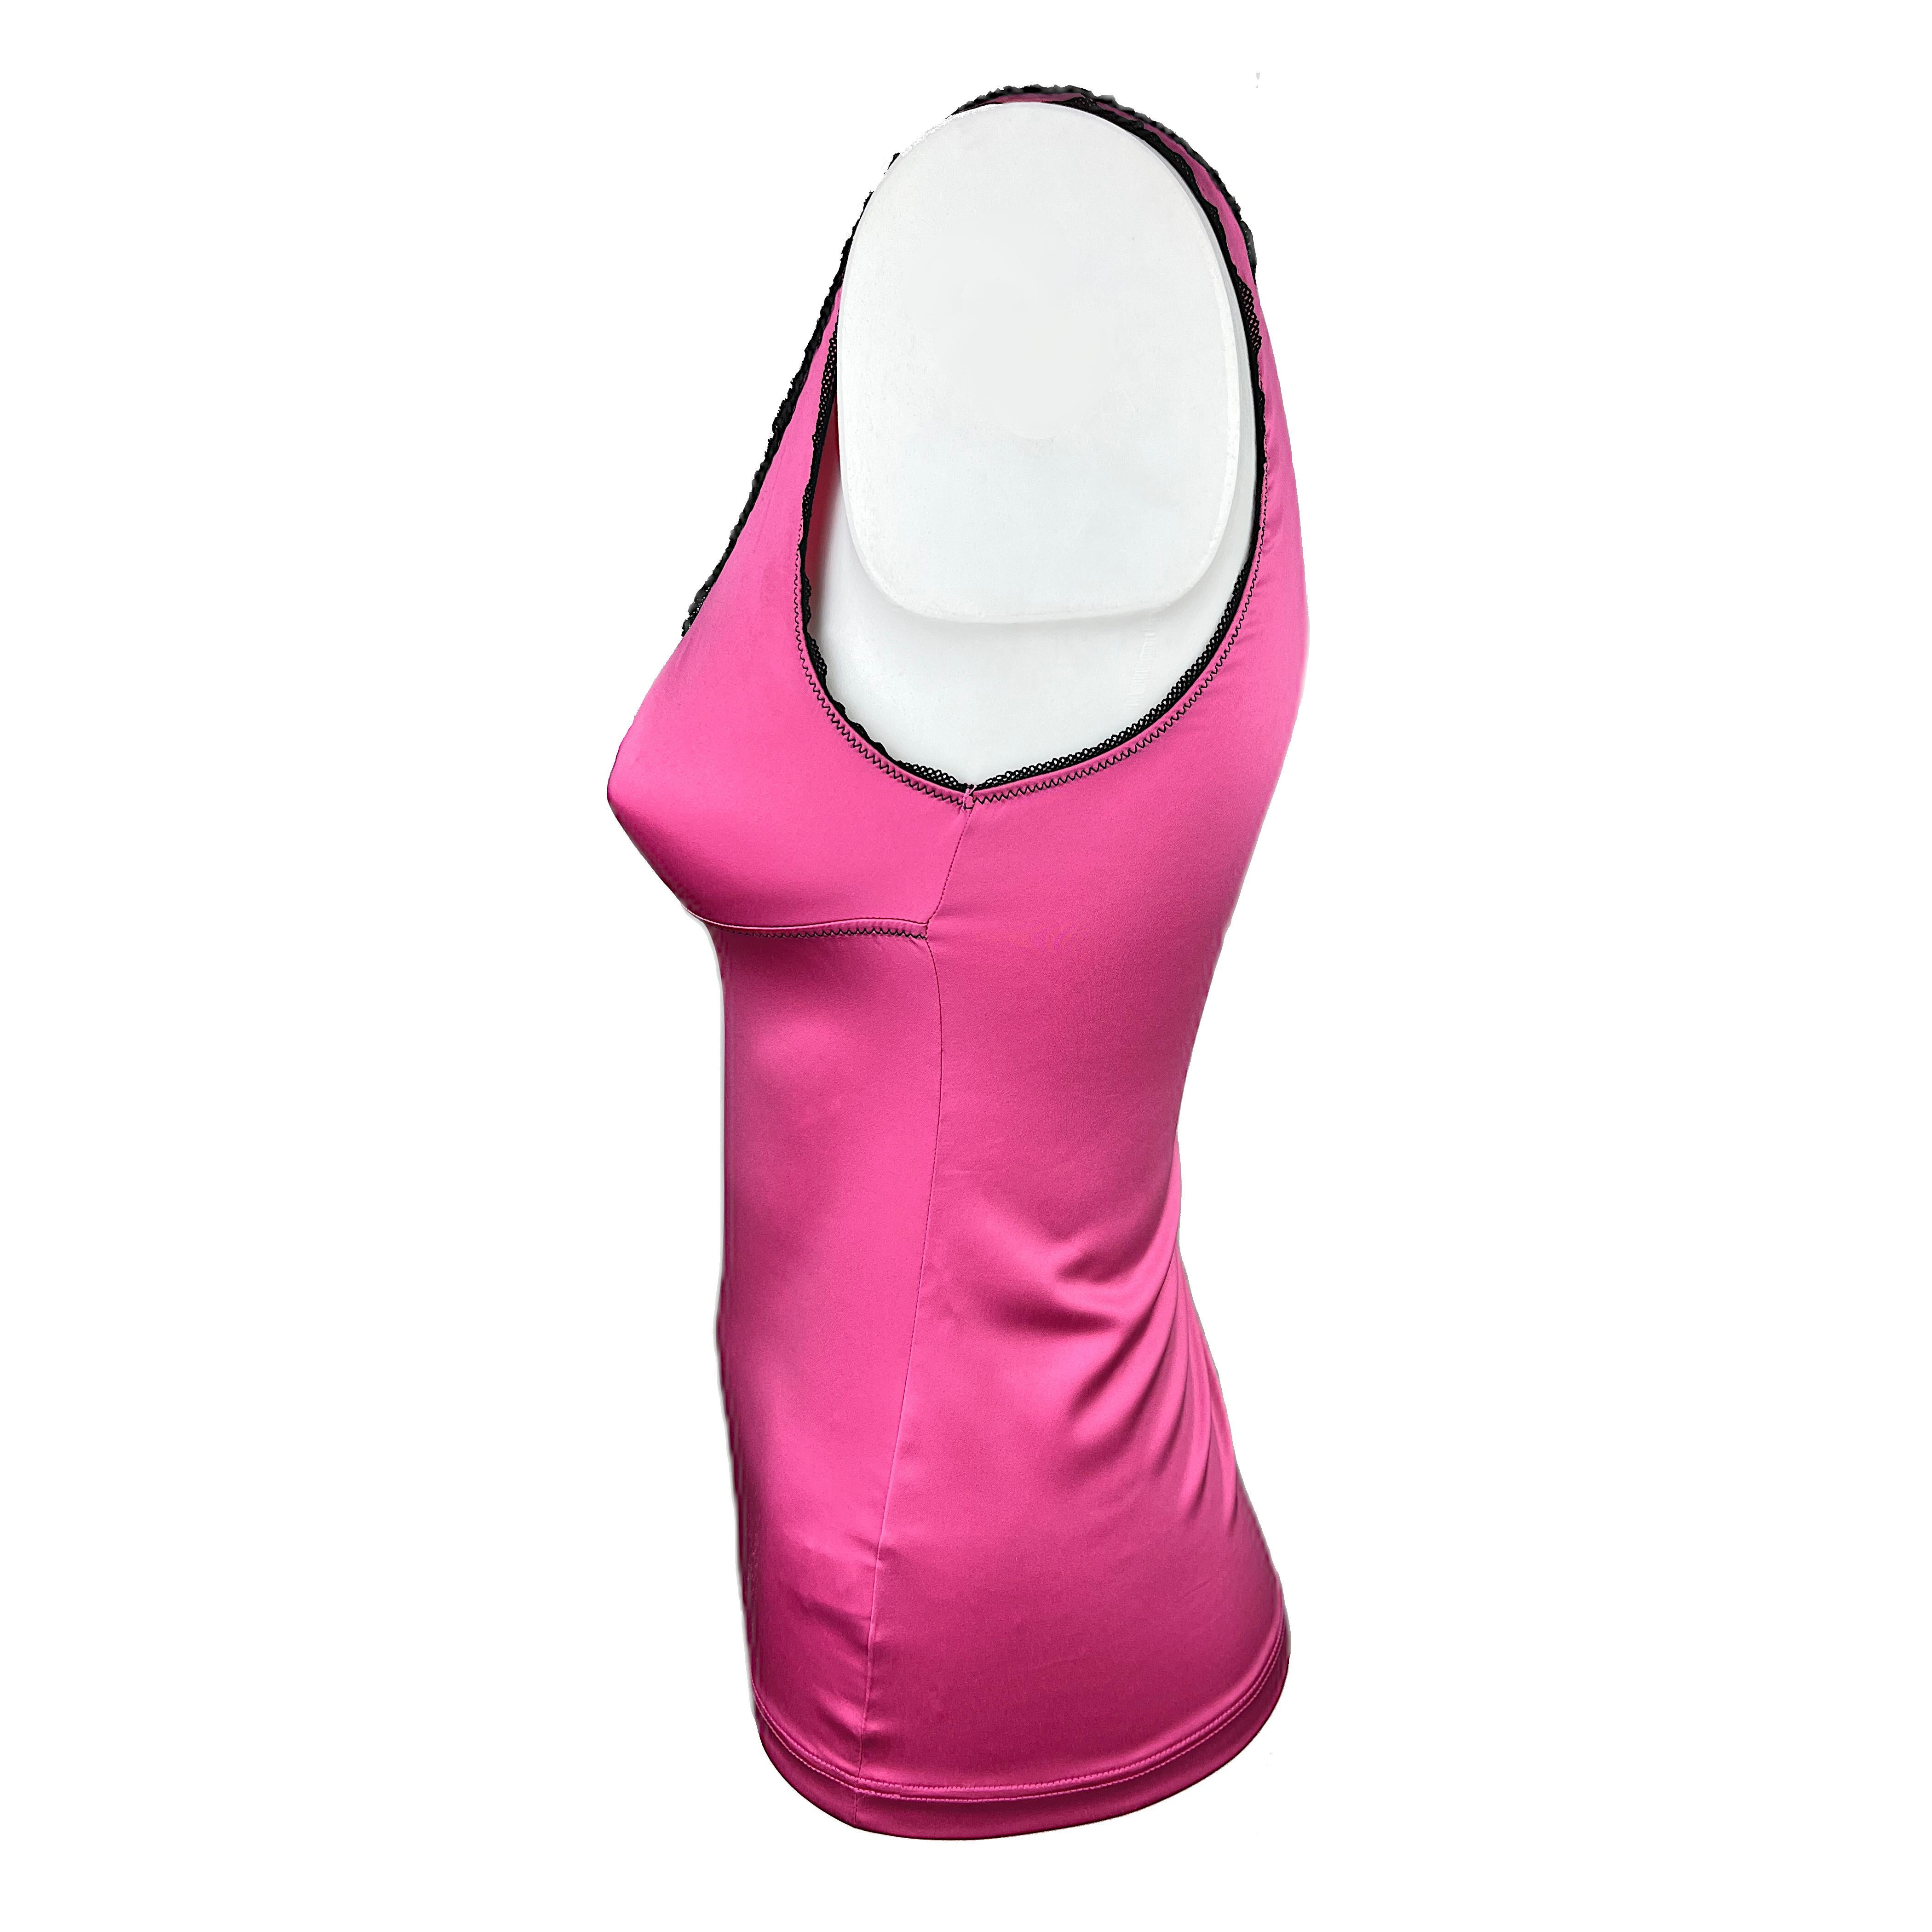 This is a sexy tank top of an intense pink with a fine black lace attached to the shoulder and collar hems. It features a golden D&G logo on the breast and fabric is very soft and comfortable. The size corresponds to an International Small.

About